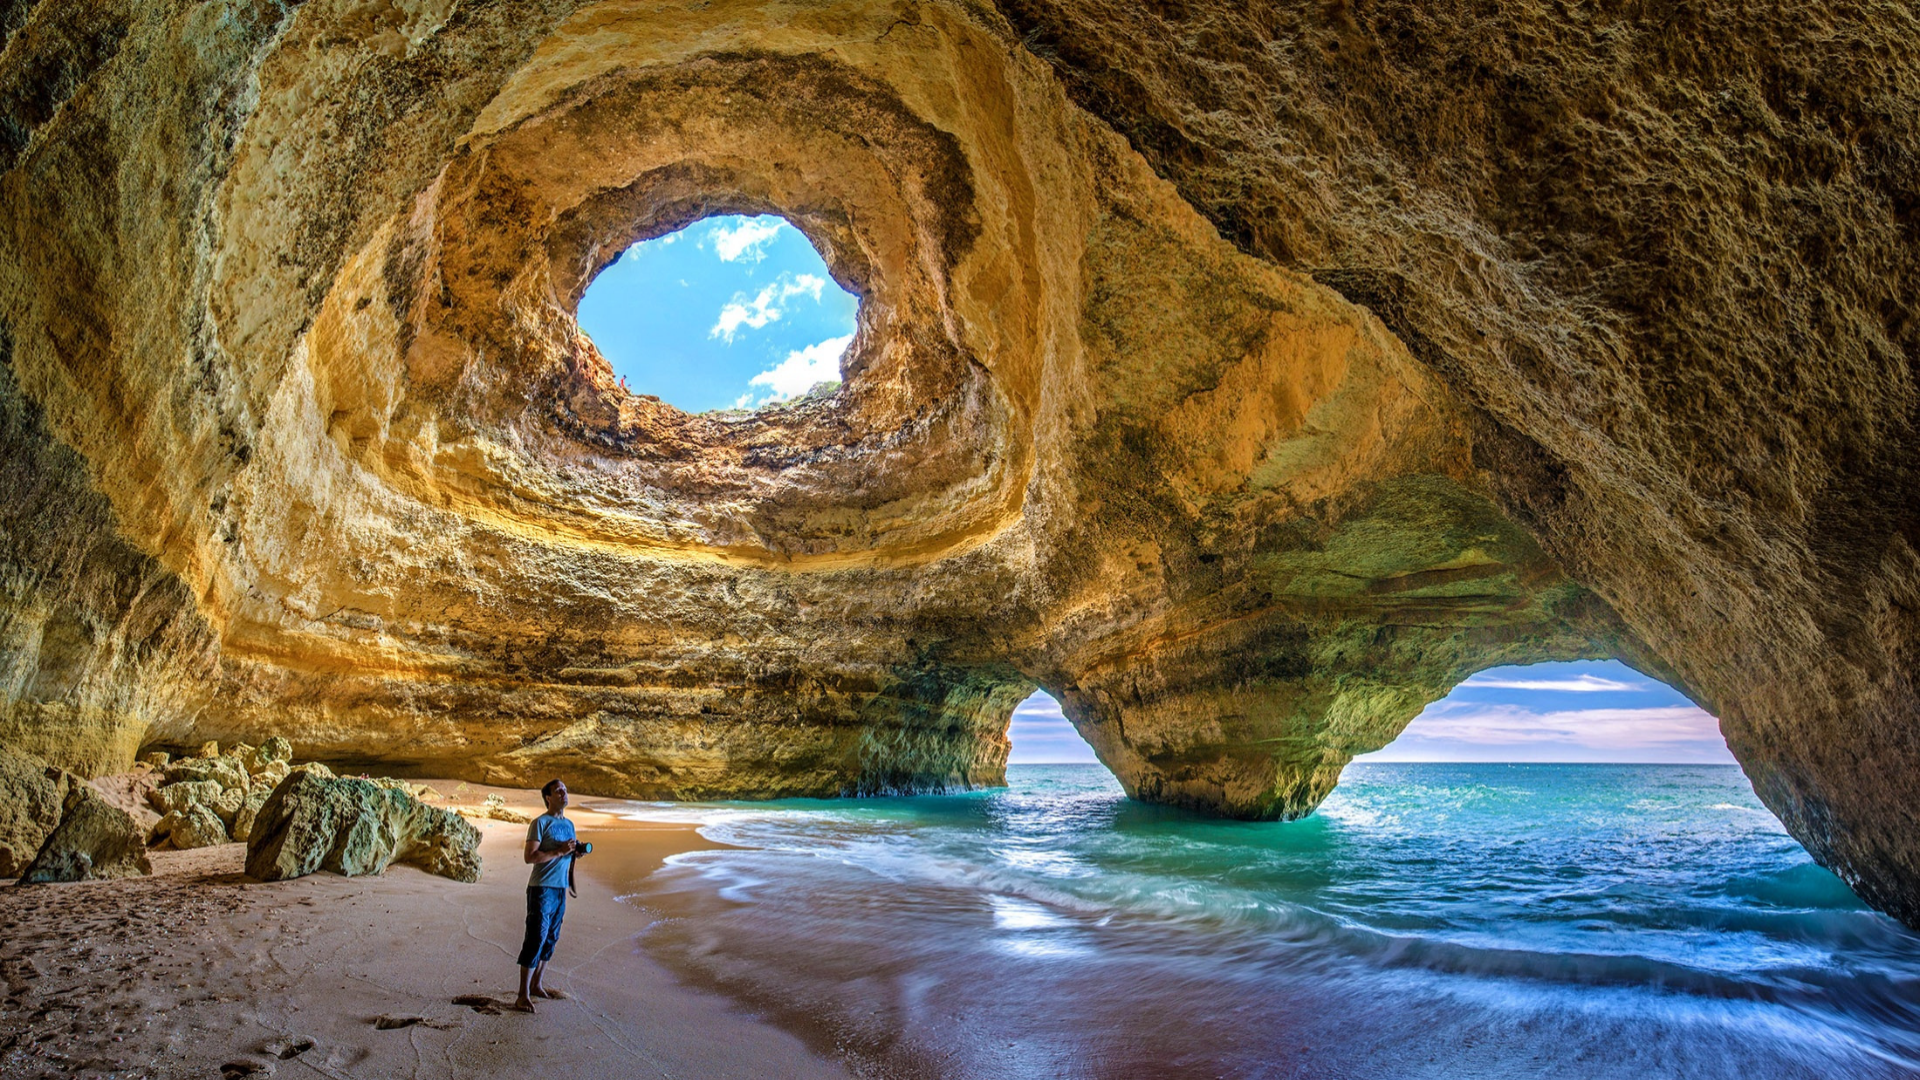 Algarve in September: the perfect welcome to the rentrée